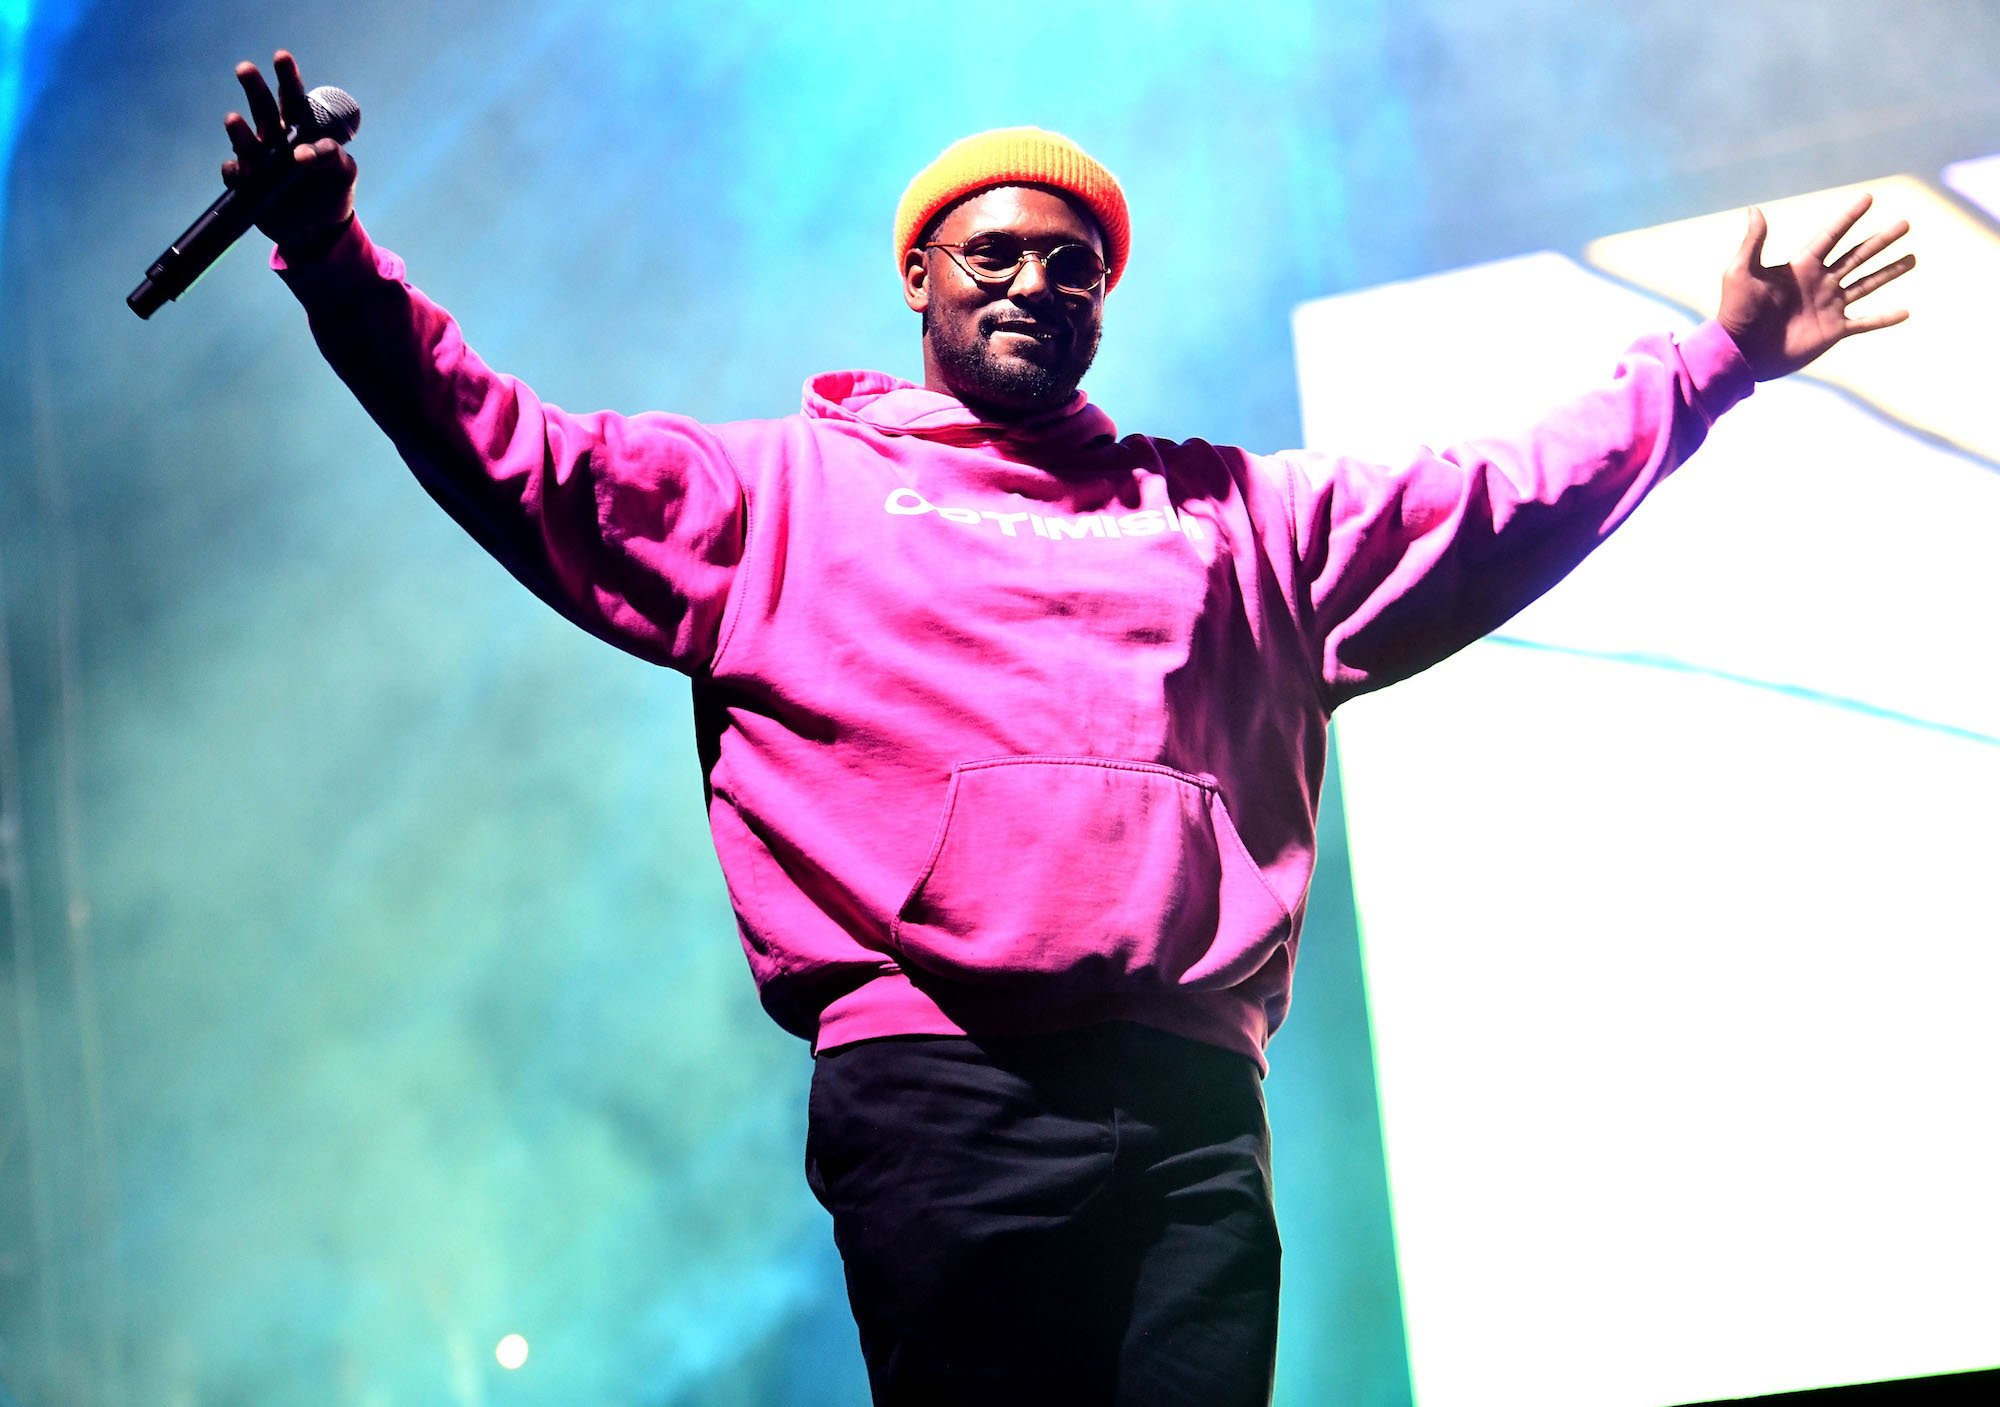 ScHoolboy Q with his arms outstretched on stage